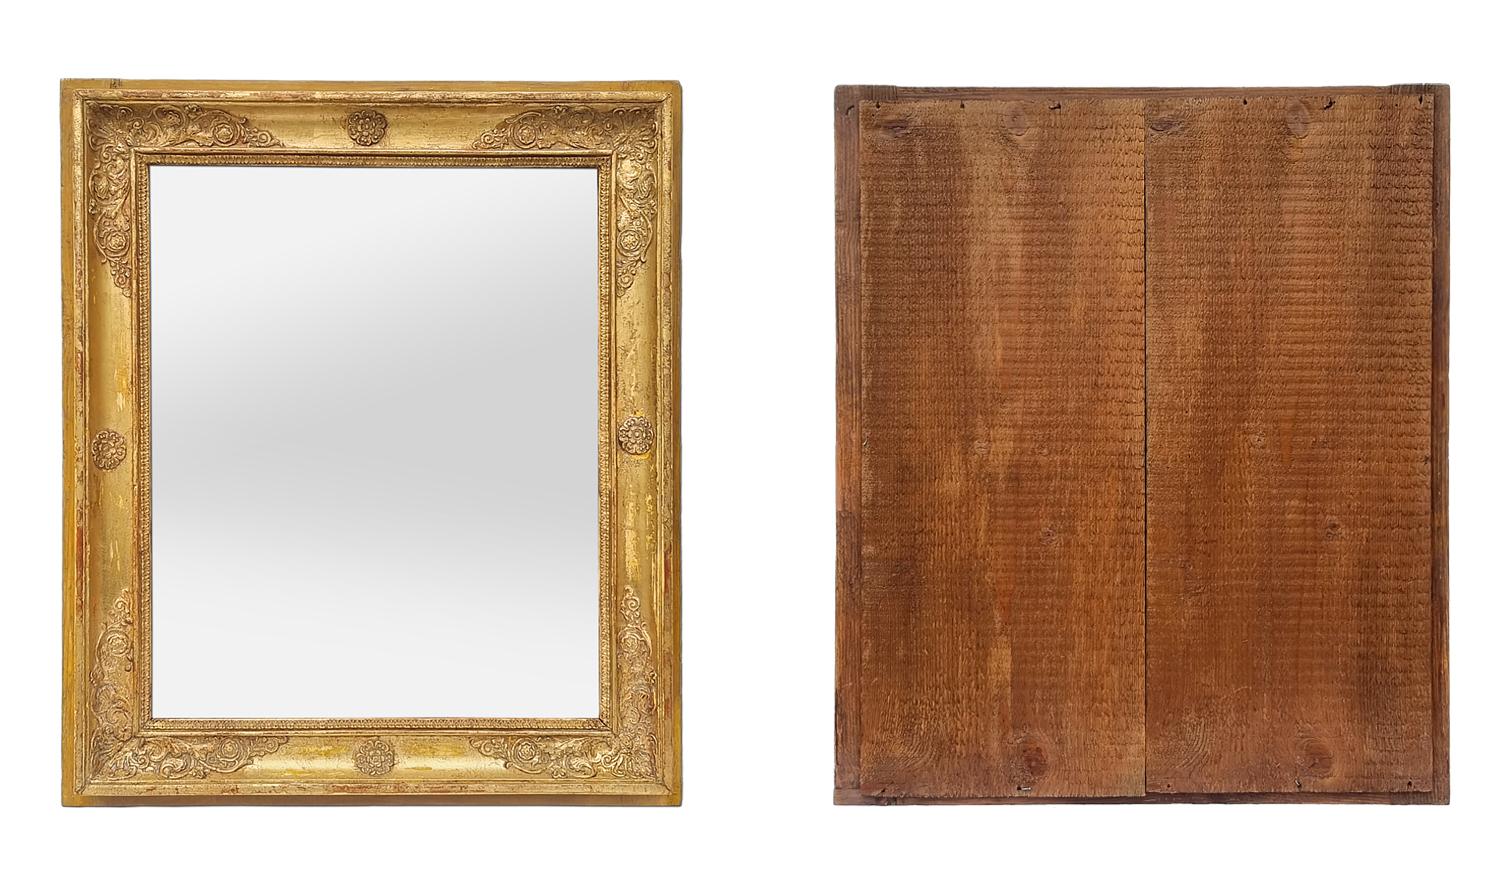 Antique French Restauration Period Giltwood Mirror, circa 1830 For Sale 3